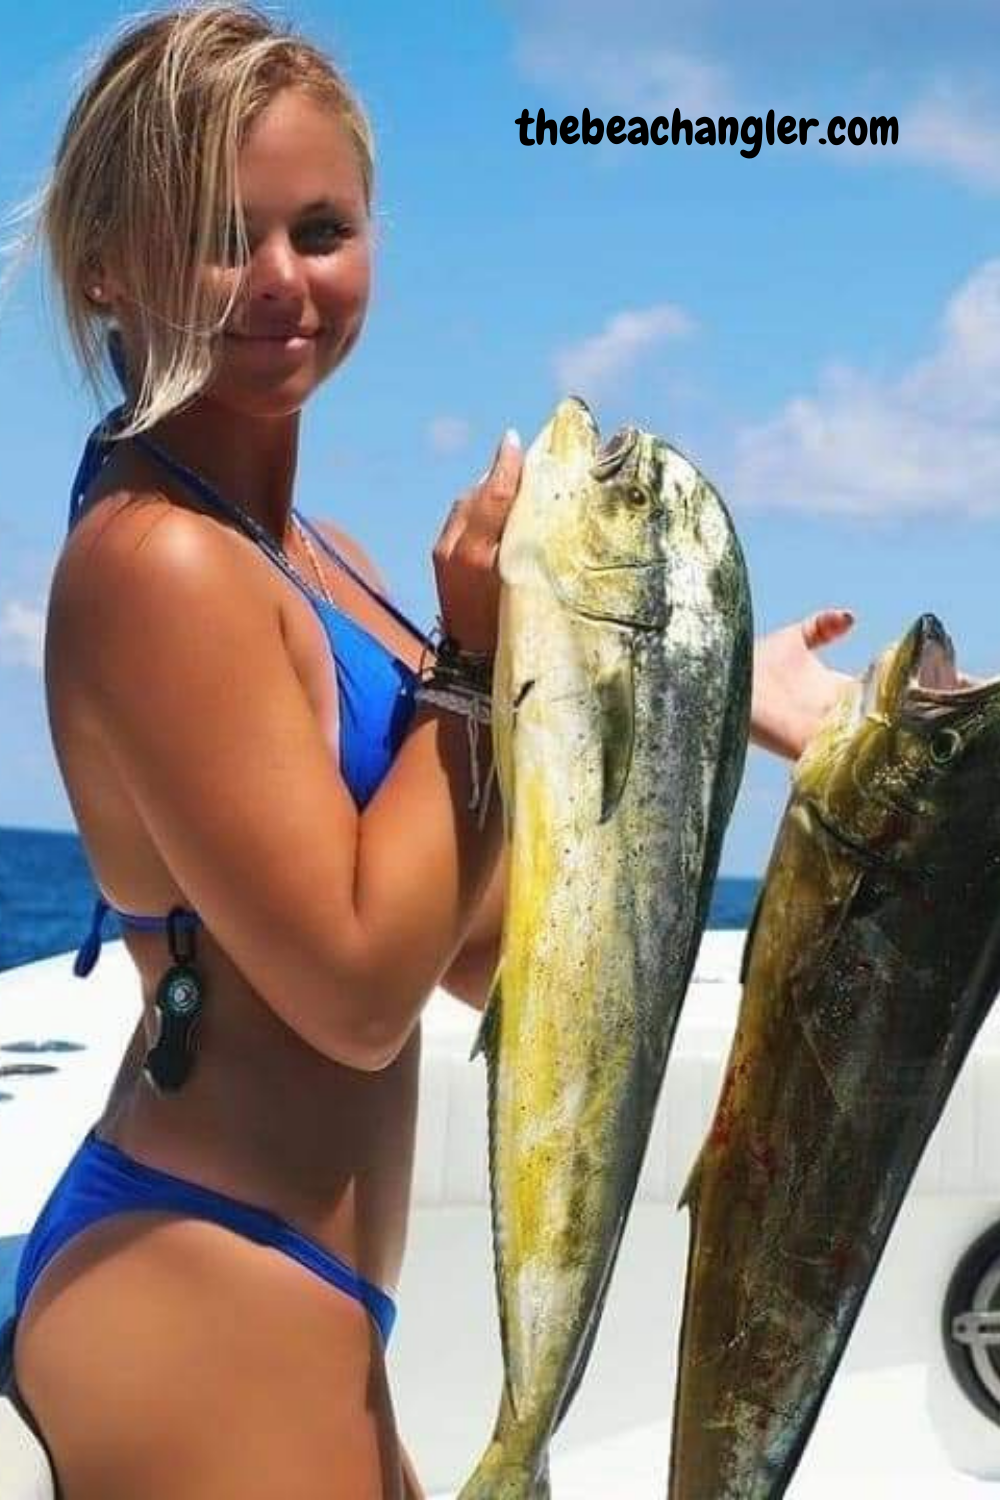 Young Lady with a double on Mahi Mahi. Now she needs a good fishing cleaning table.